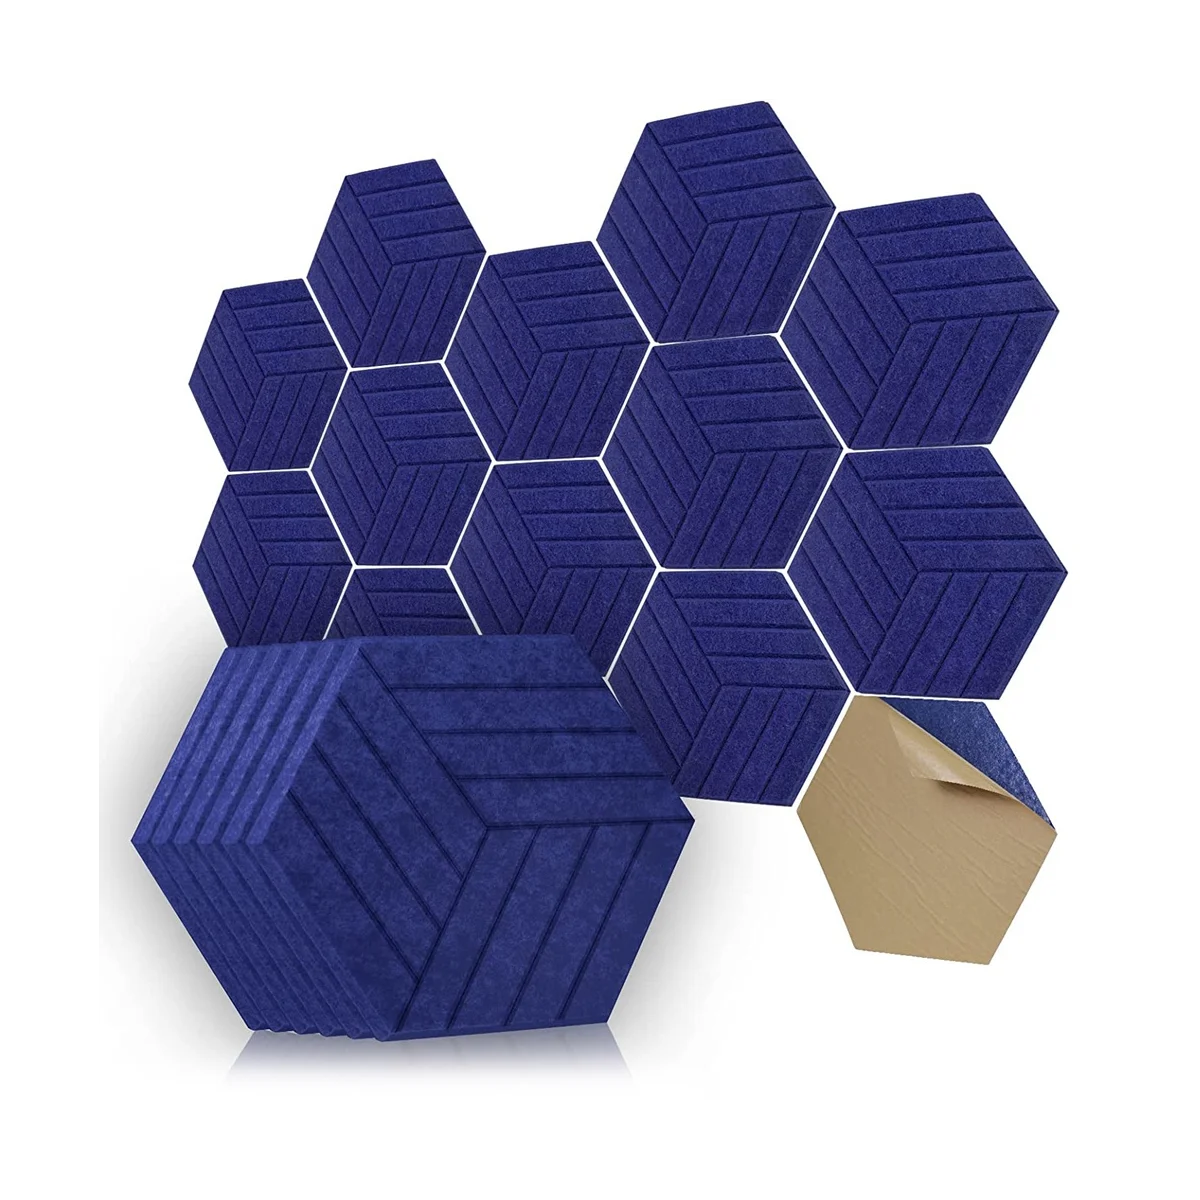 

Sound Proof Panels Hexagon Self-Adhesive,12 Pcs Acoustic Panel, Sound Dampening Panel for Studio Office Home,5